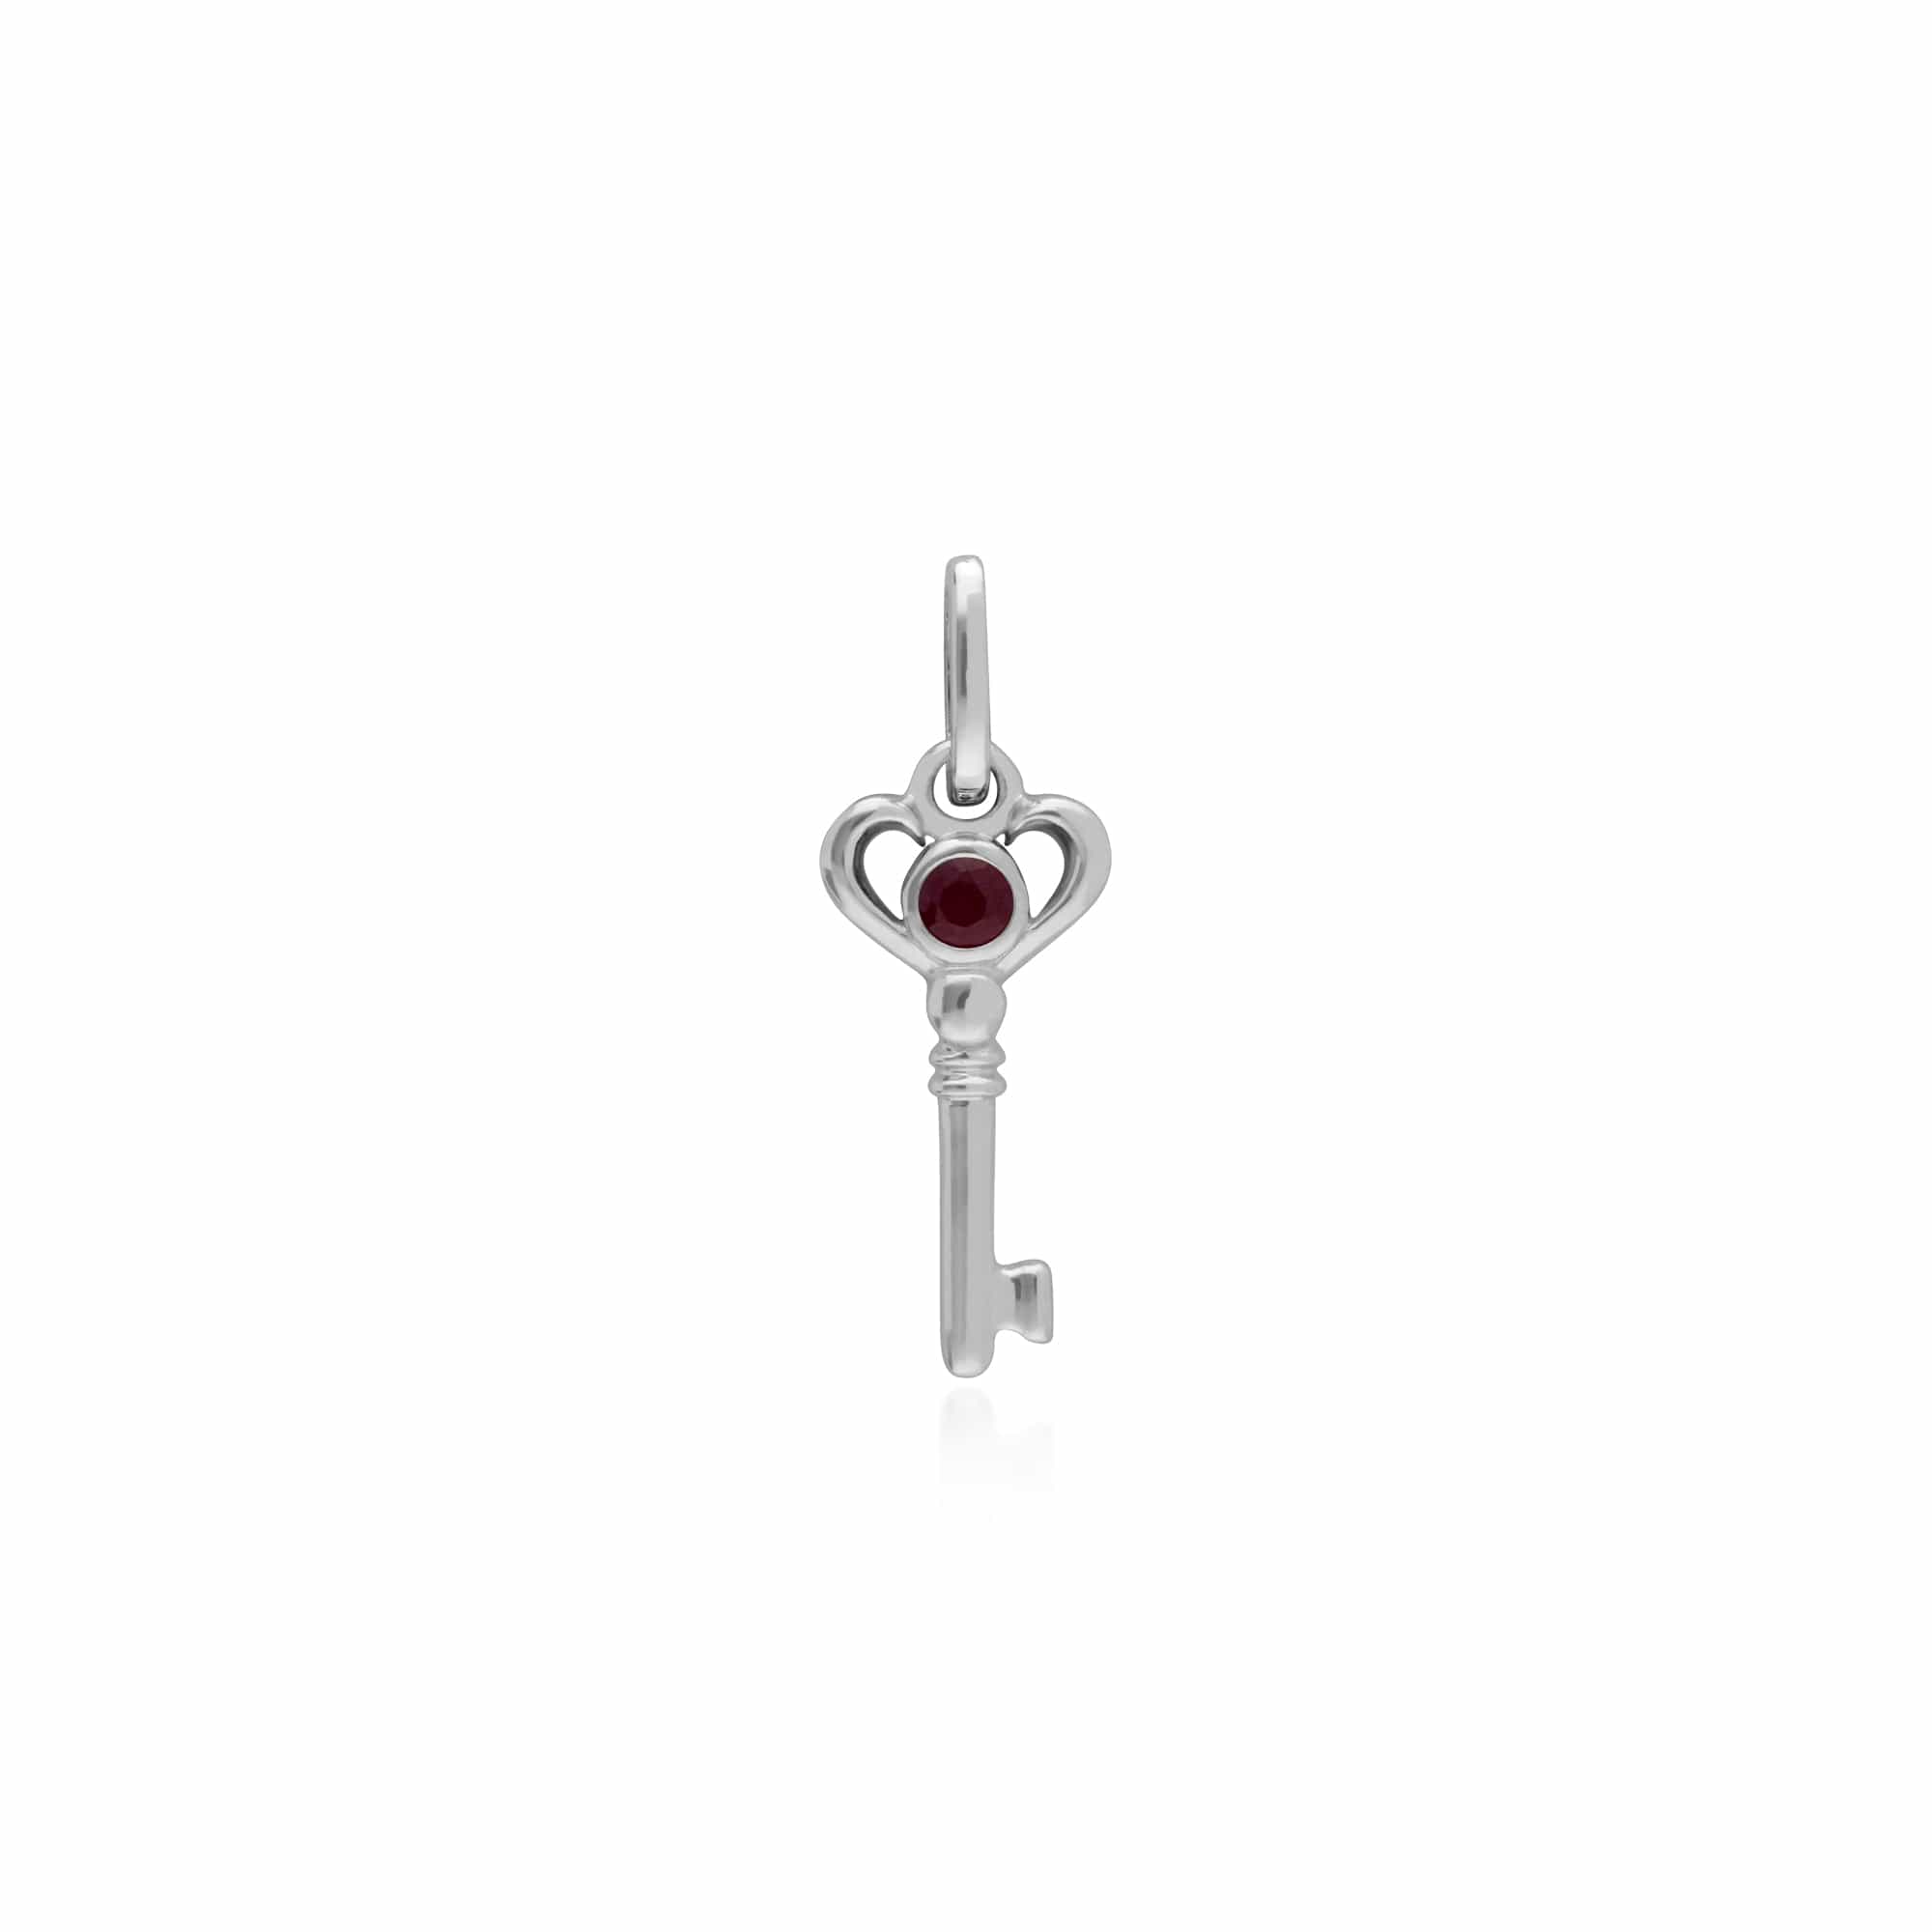 270P026402925-270P027001925 Classic Heart Lock Pendant & Ruby Key Charm in 925 Sterling Silver 2